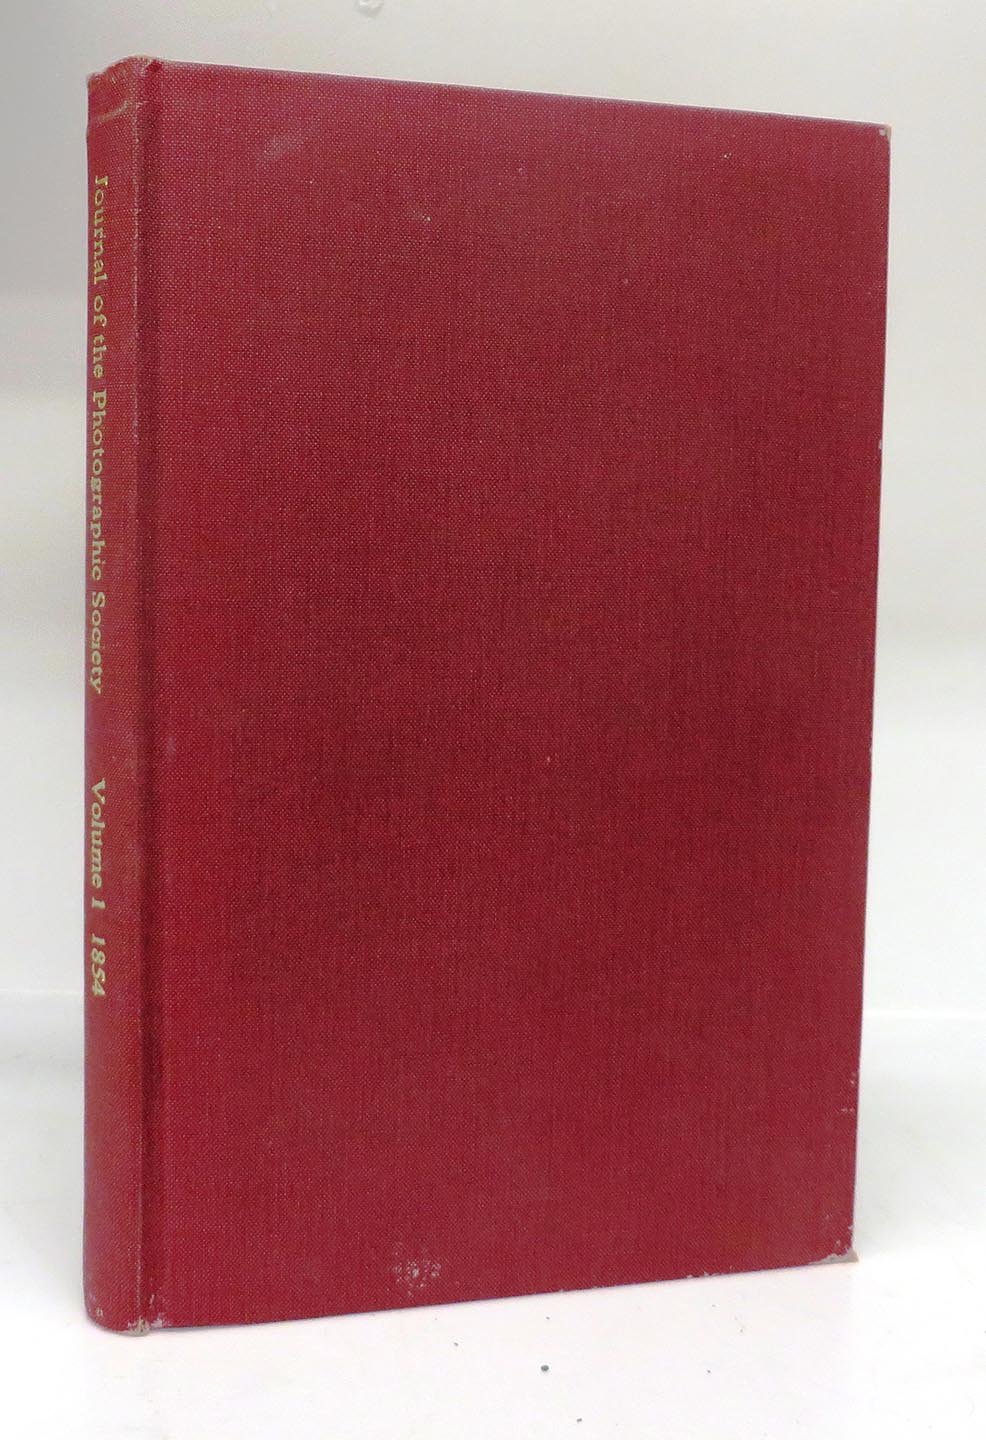 The Journal of the Photographic Society of London. Containing the Transactions of the Society and a General Rrecord of Photographic Art and Science